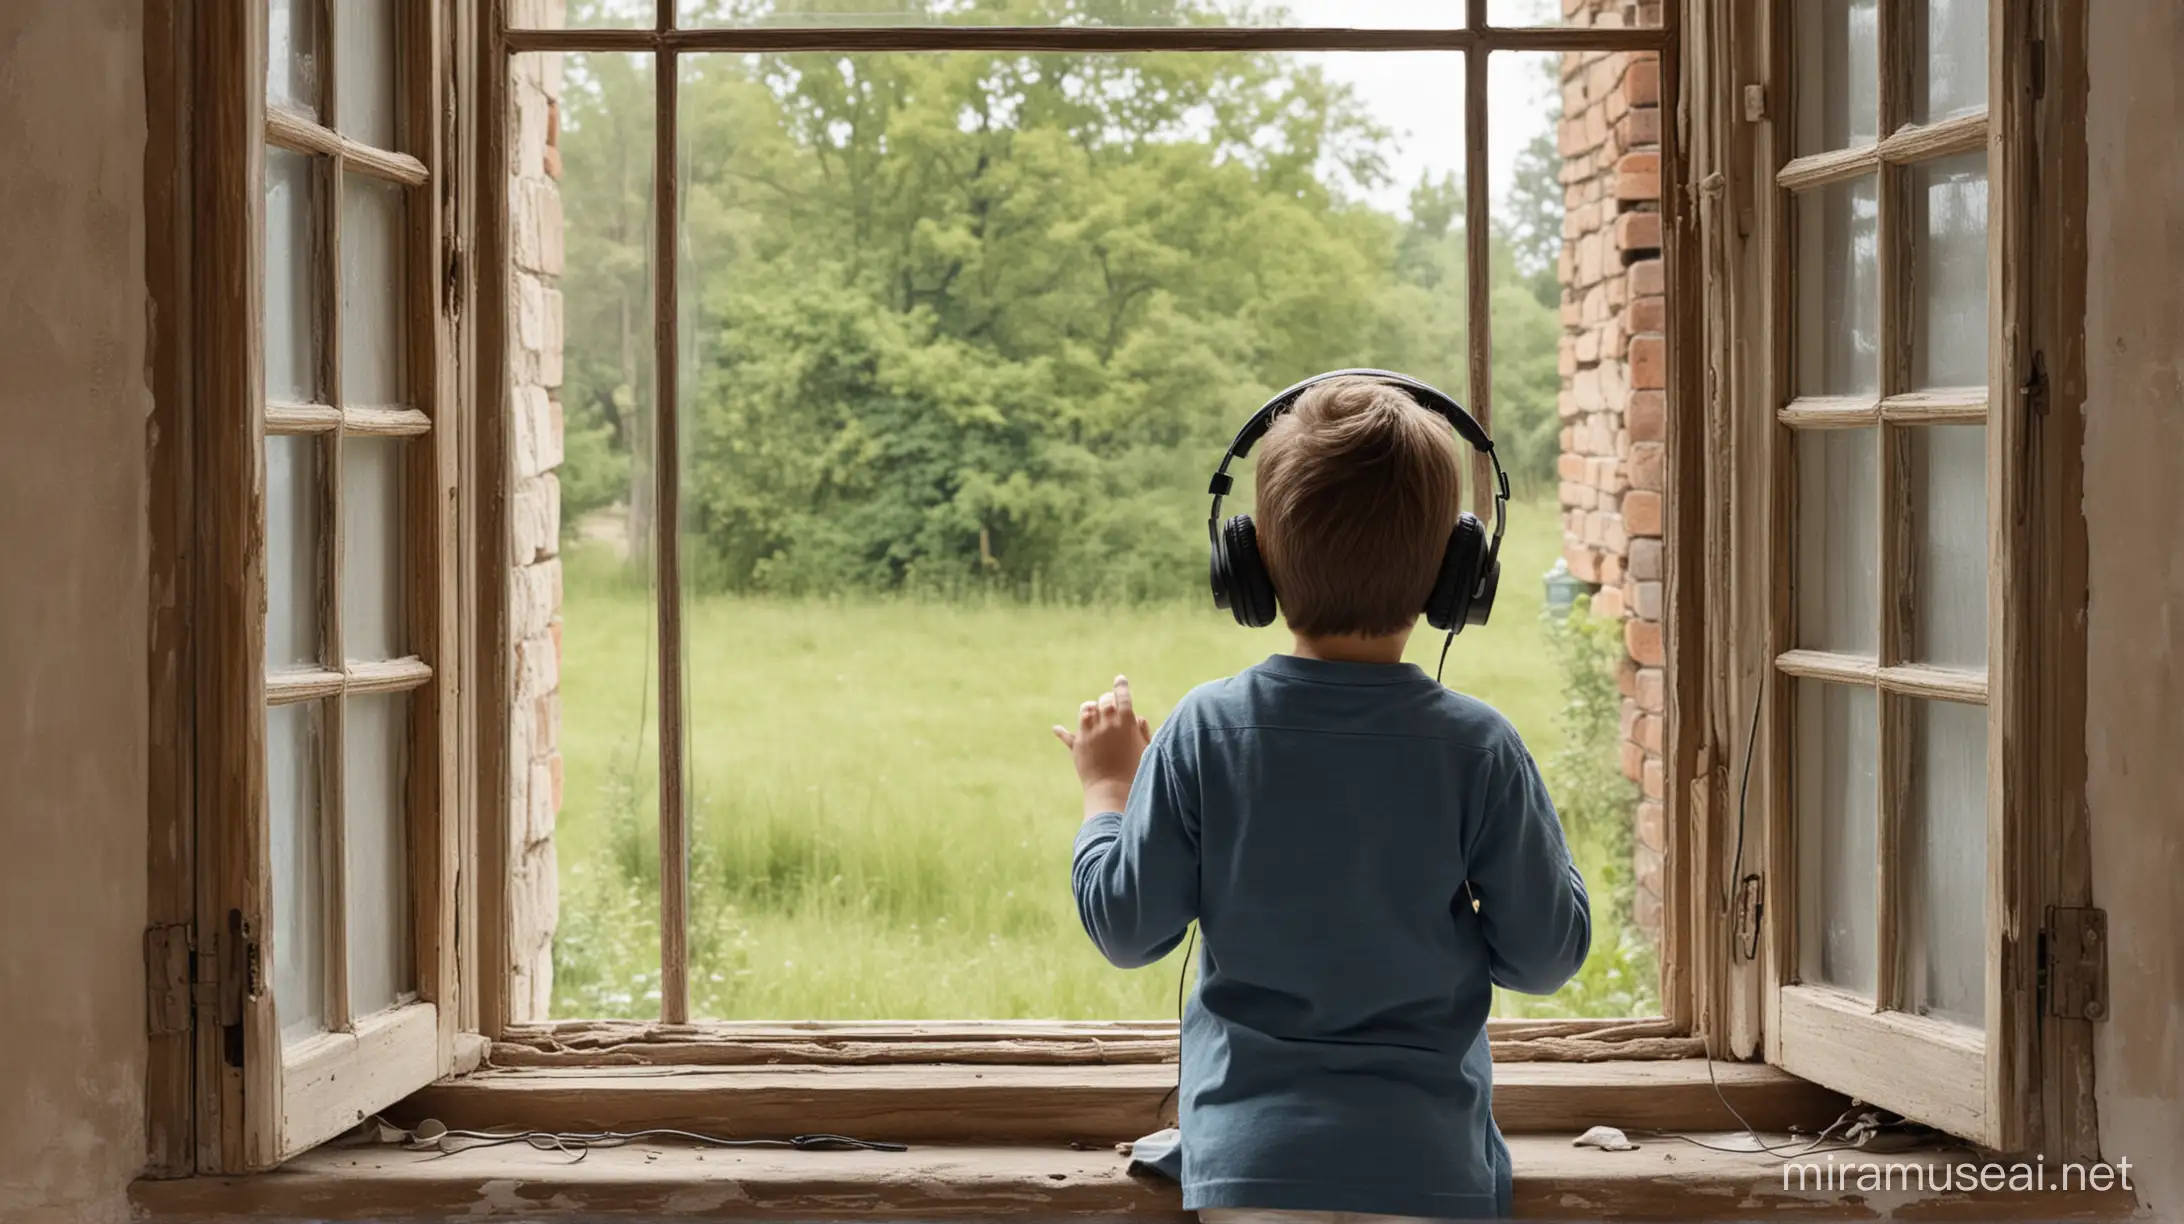 Child Wearing Headphones Looking Out of Traditional Window